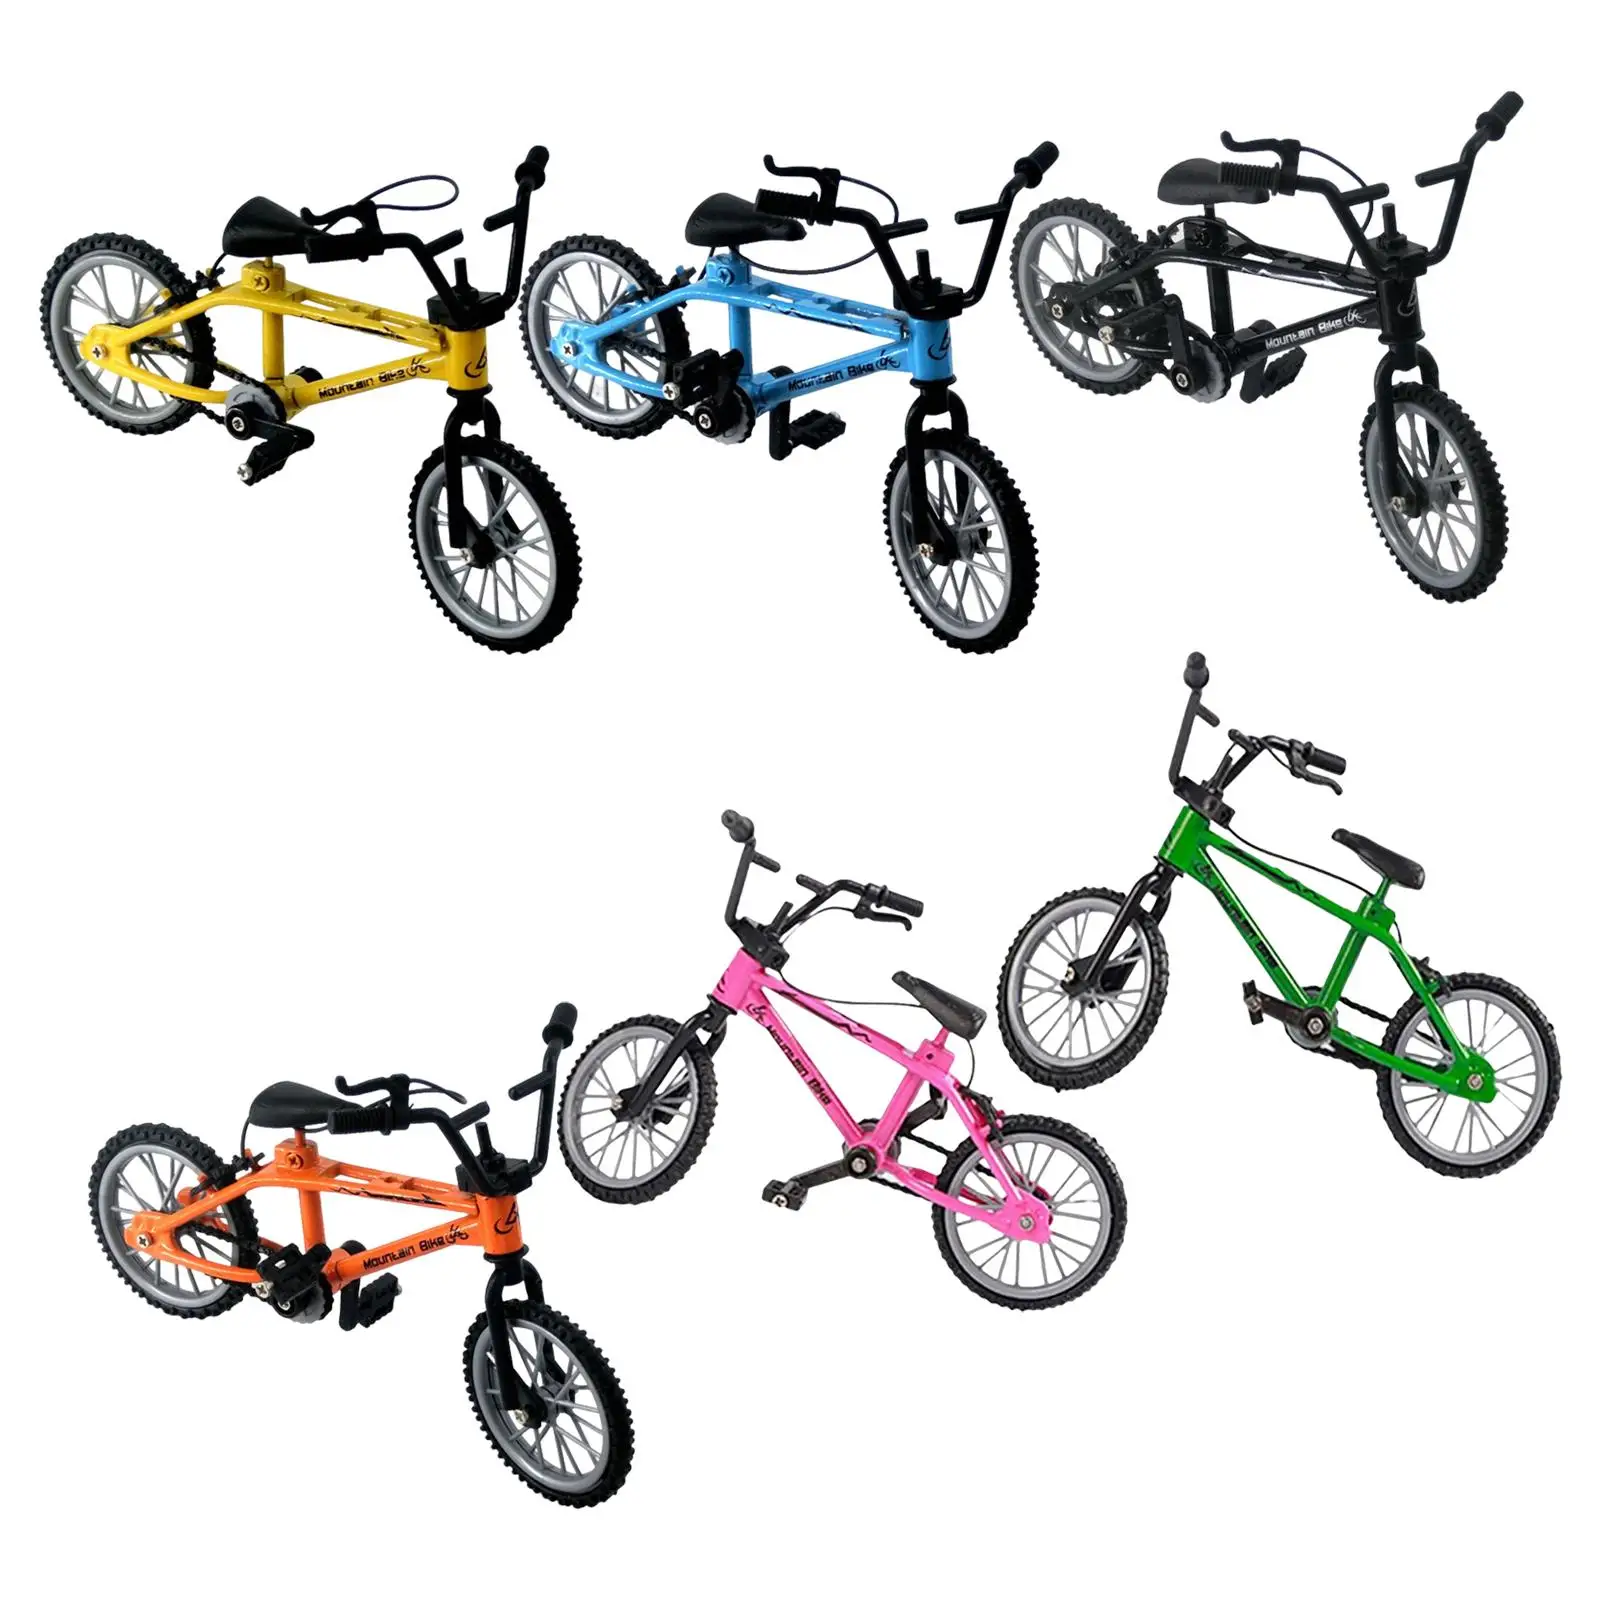 Mini Bicycle Model Crafts for Kids Boys Miniature Racing Bicycle Model Mountain Bike Model for Home Office Decoration Ornaments